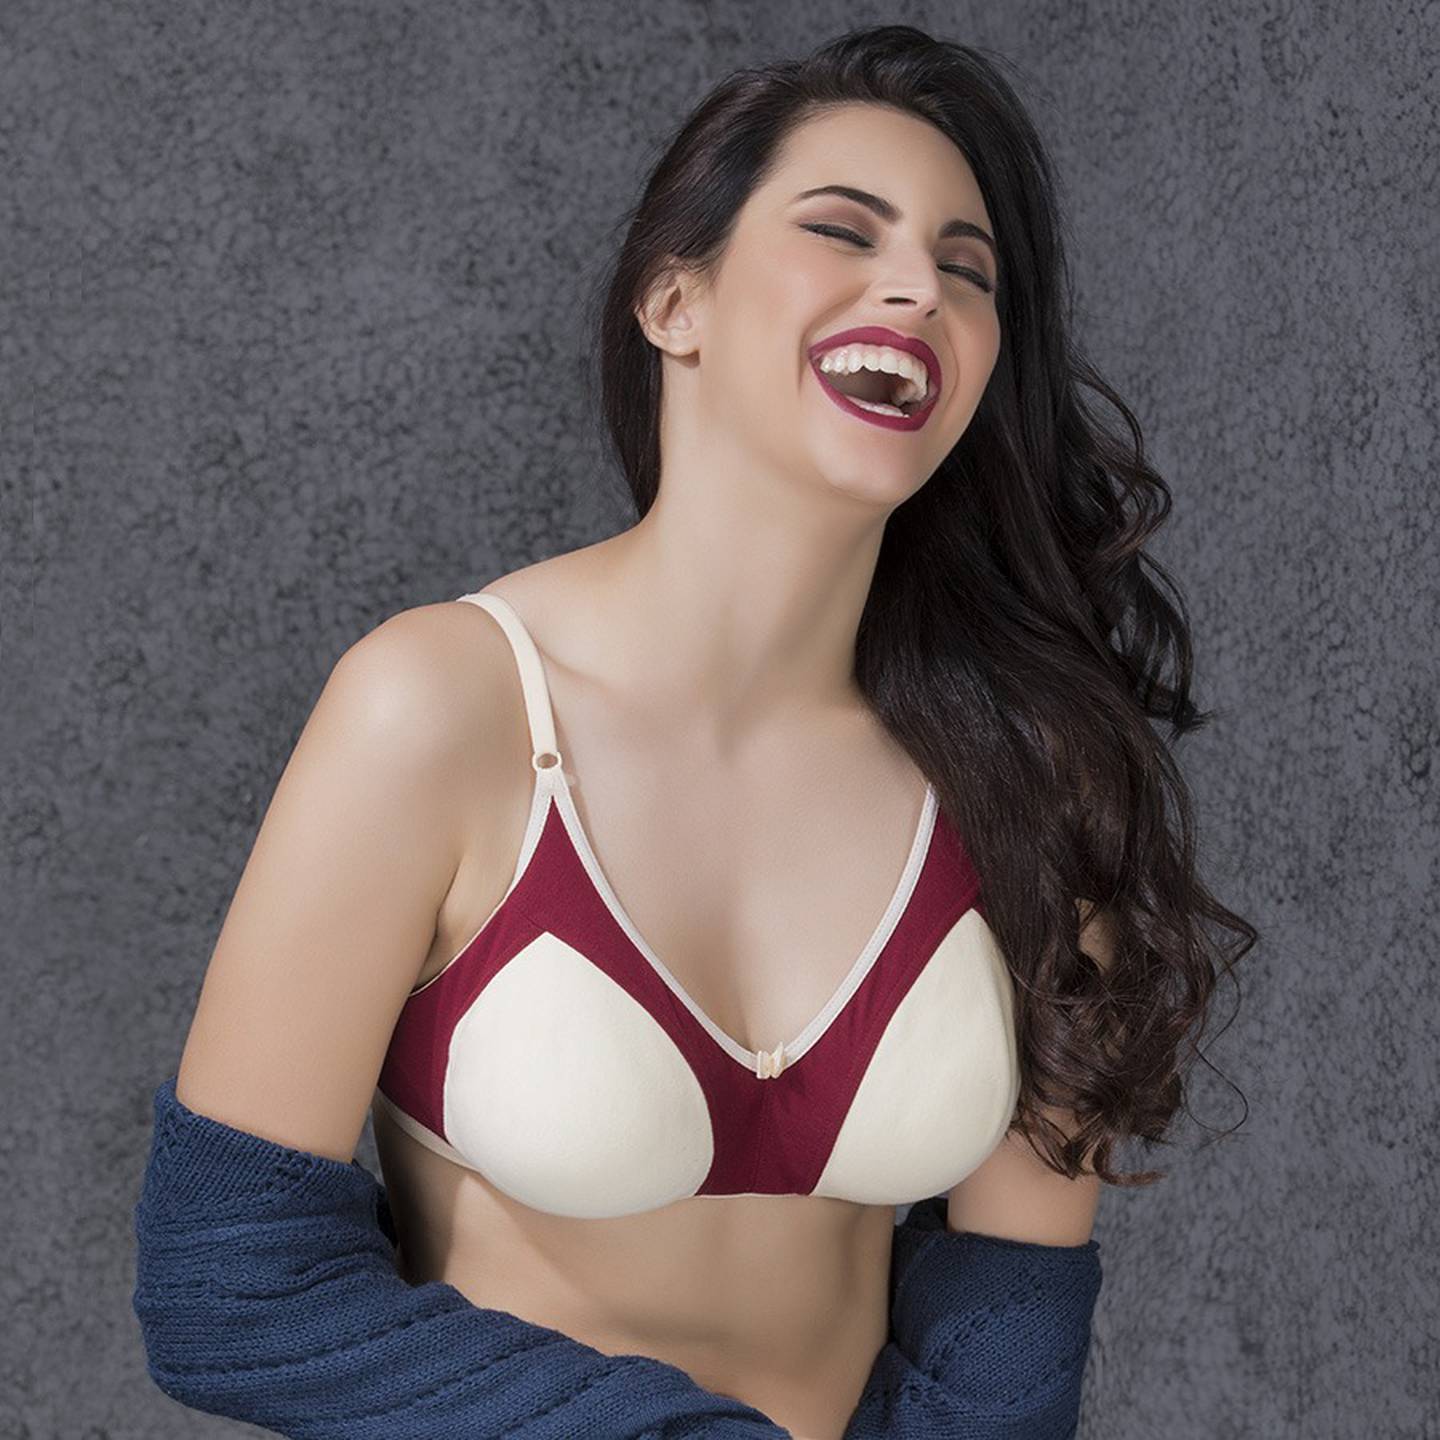 The direct-to-consumer lingerie and personal care brand is popular with young Indian consumers.